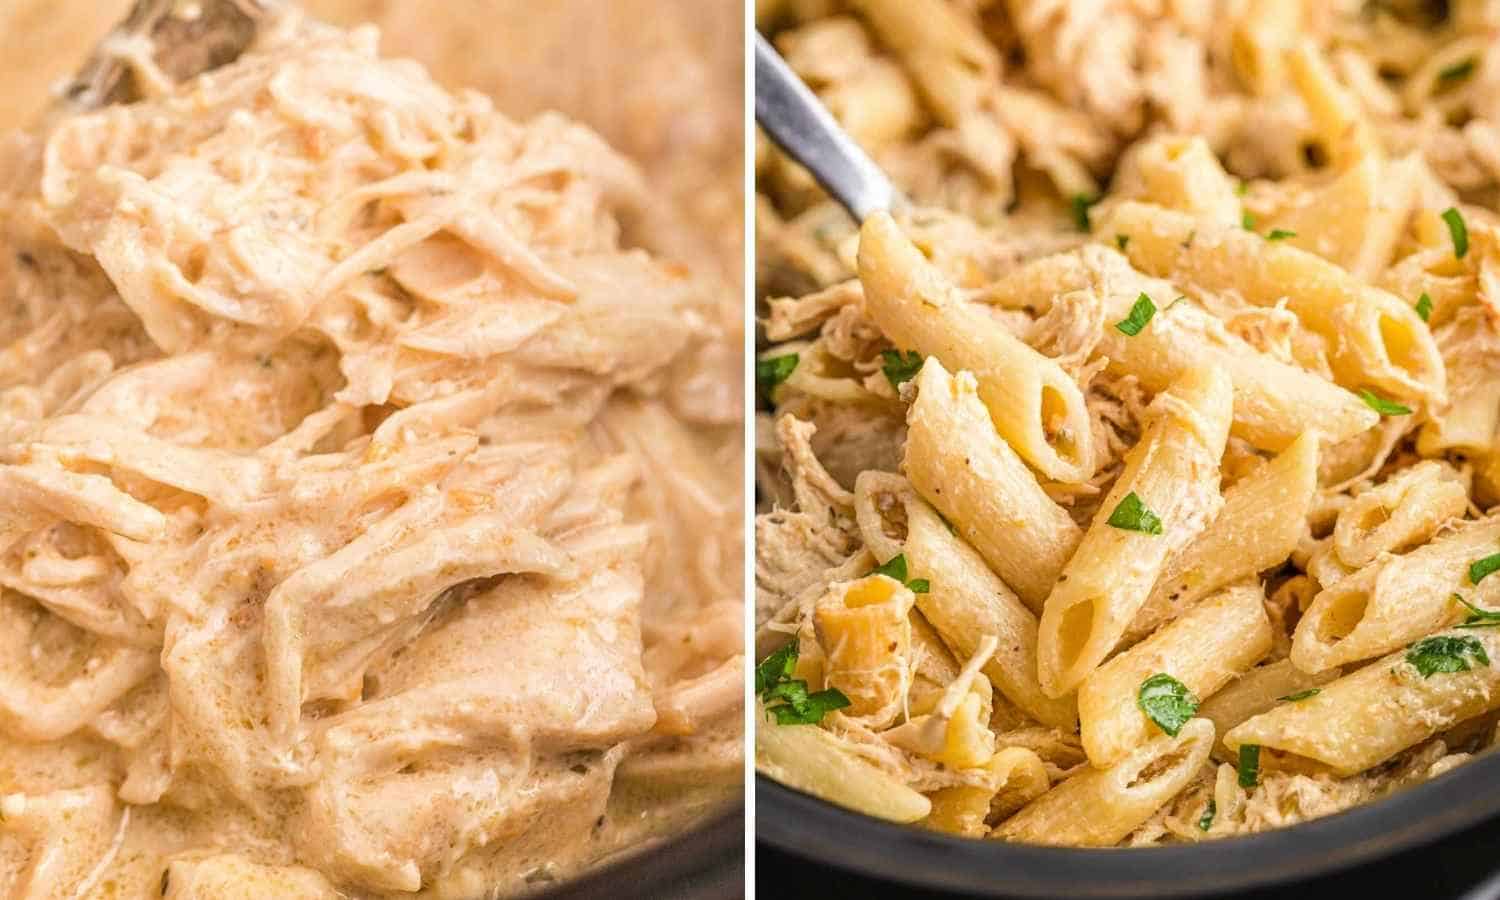 Collage of two images showing how to make shredded chicken and then mixed with pasta